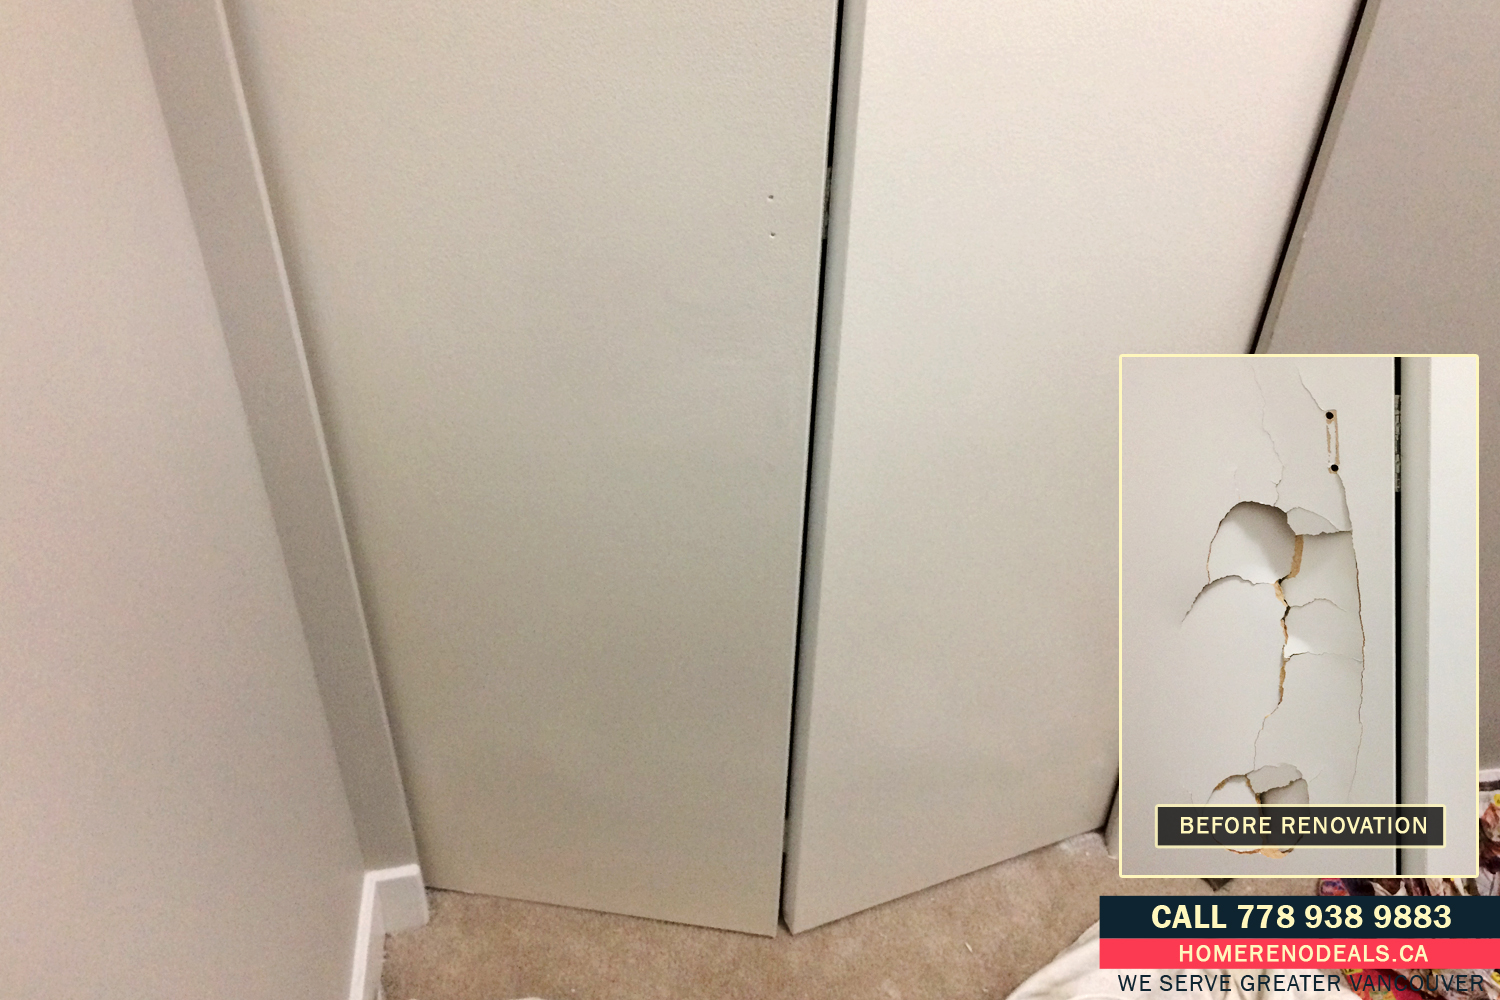 Same Day Closet Door Repair Service in Greater Vancouver, BC